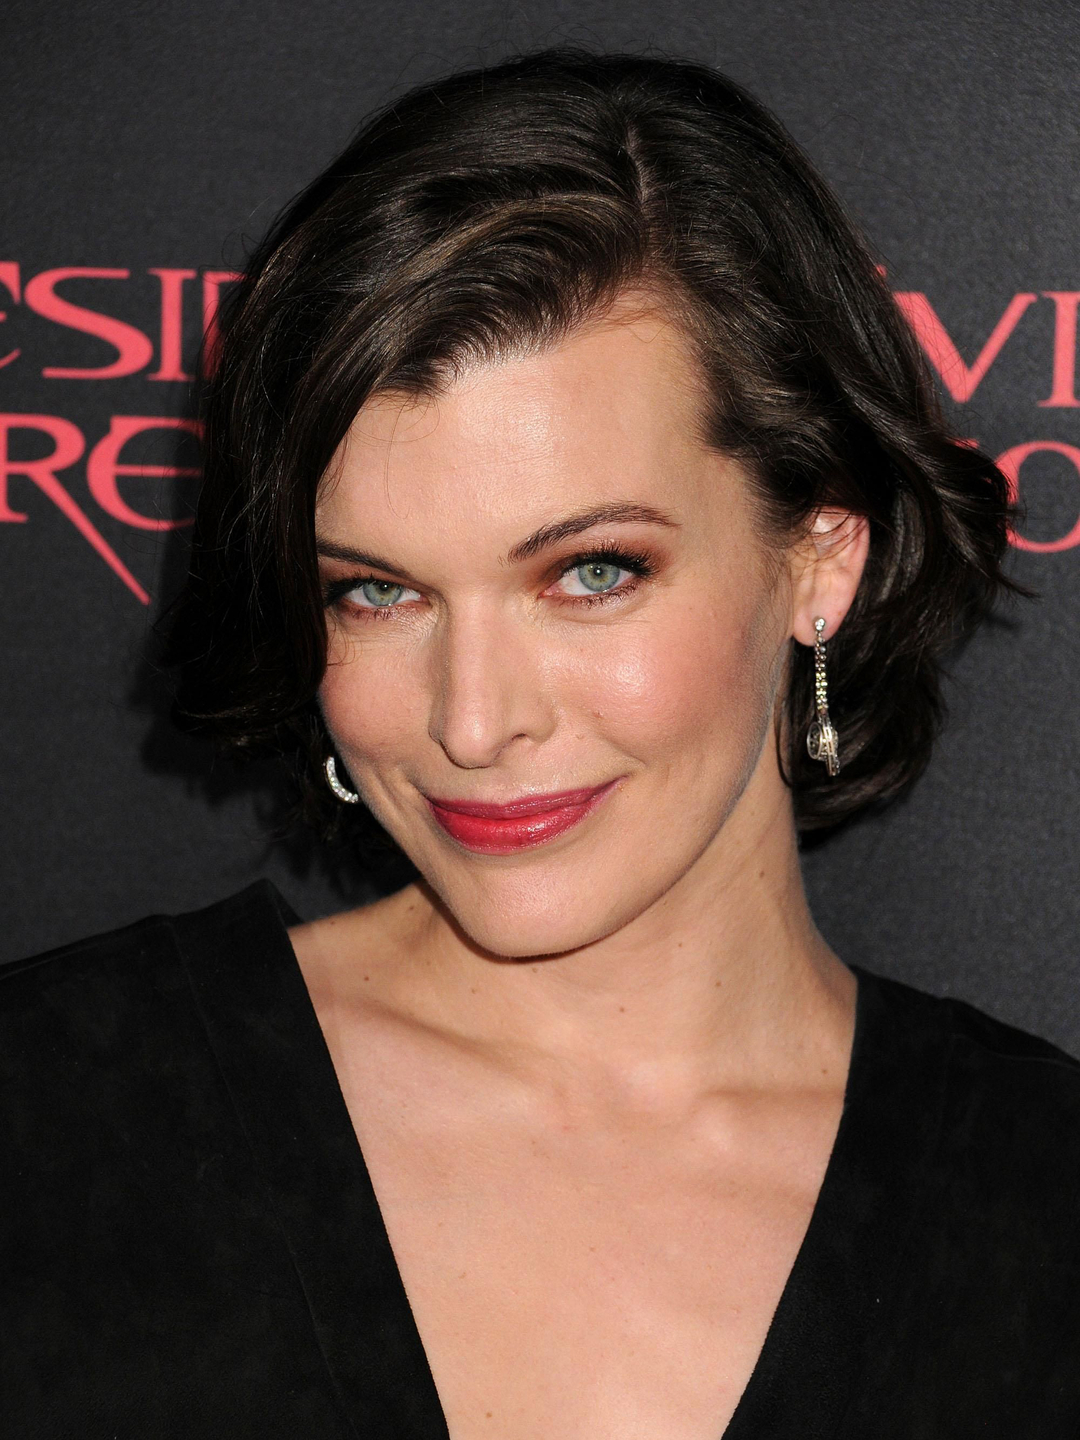 Milla Jovovich where is she now